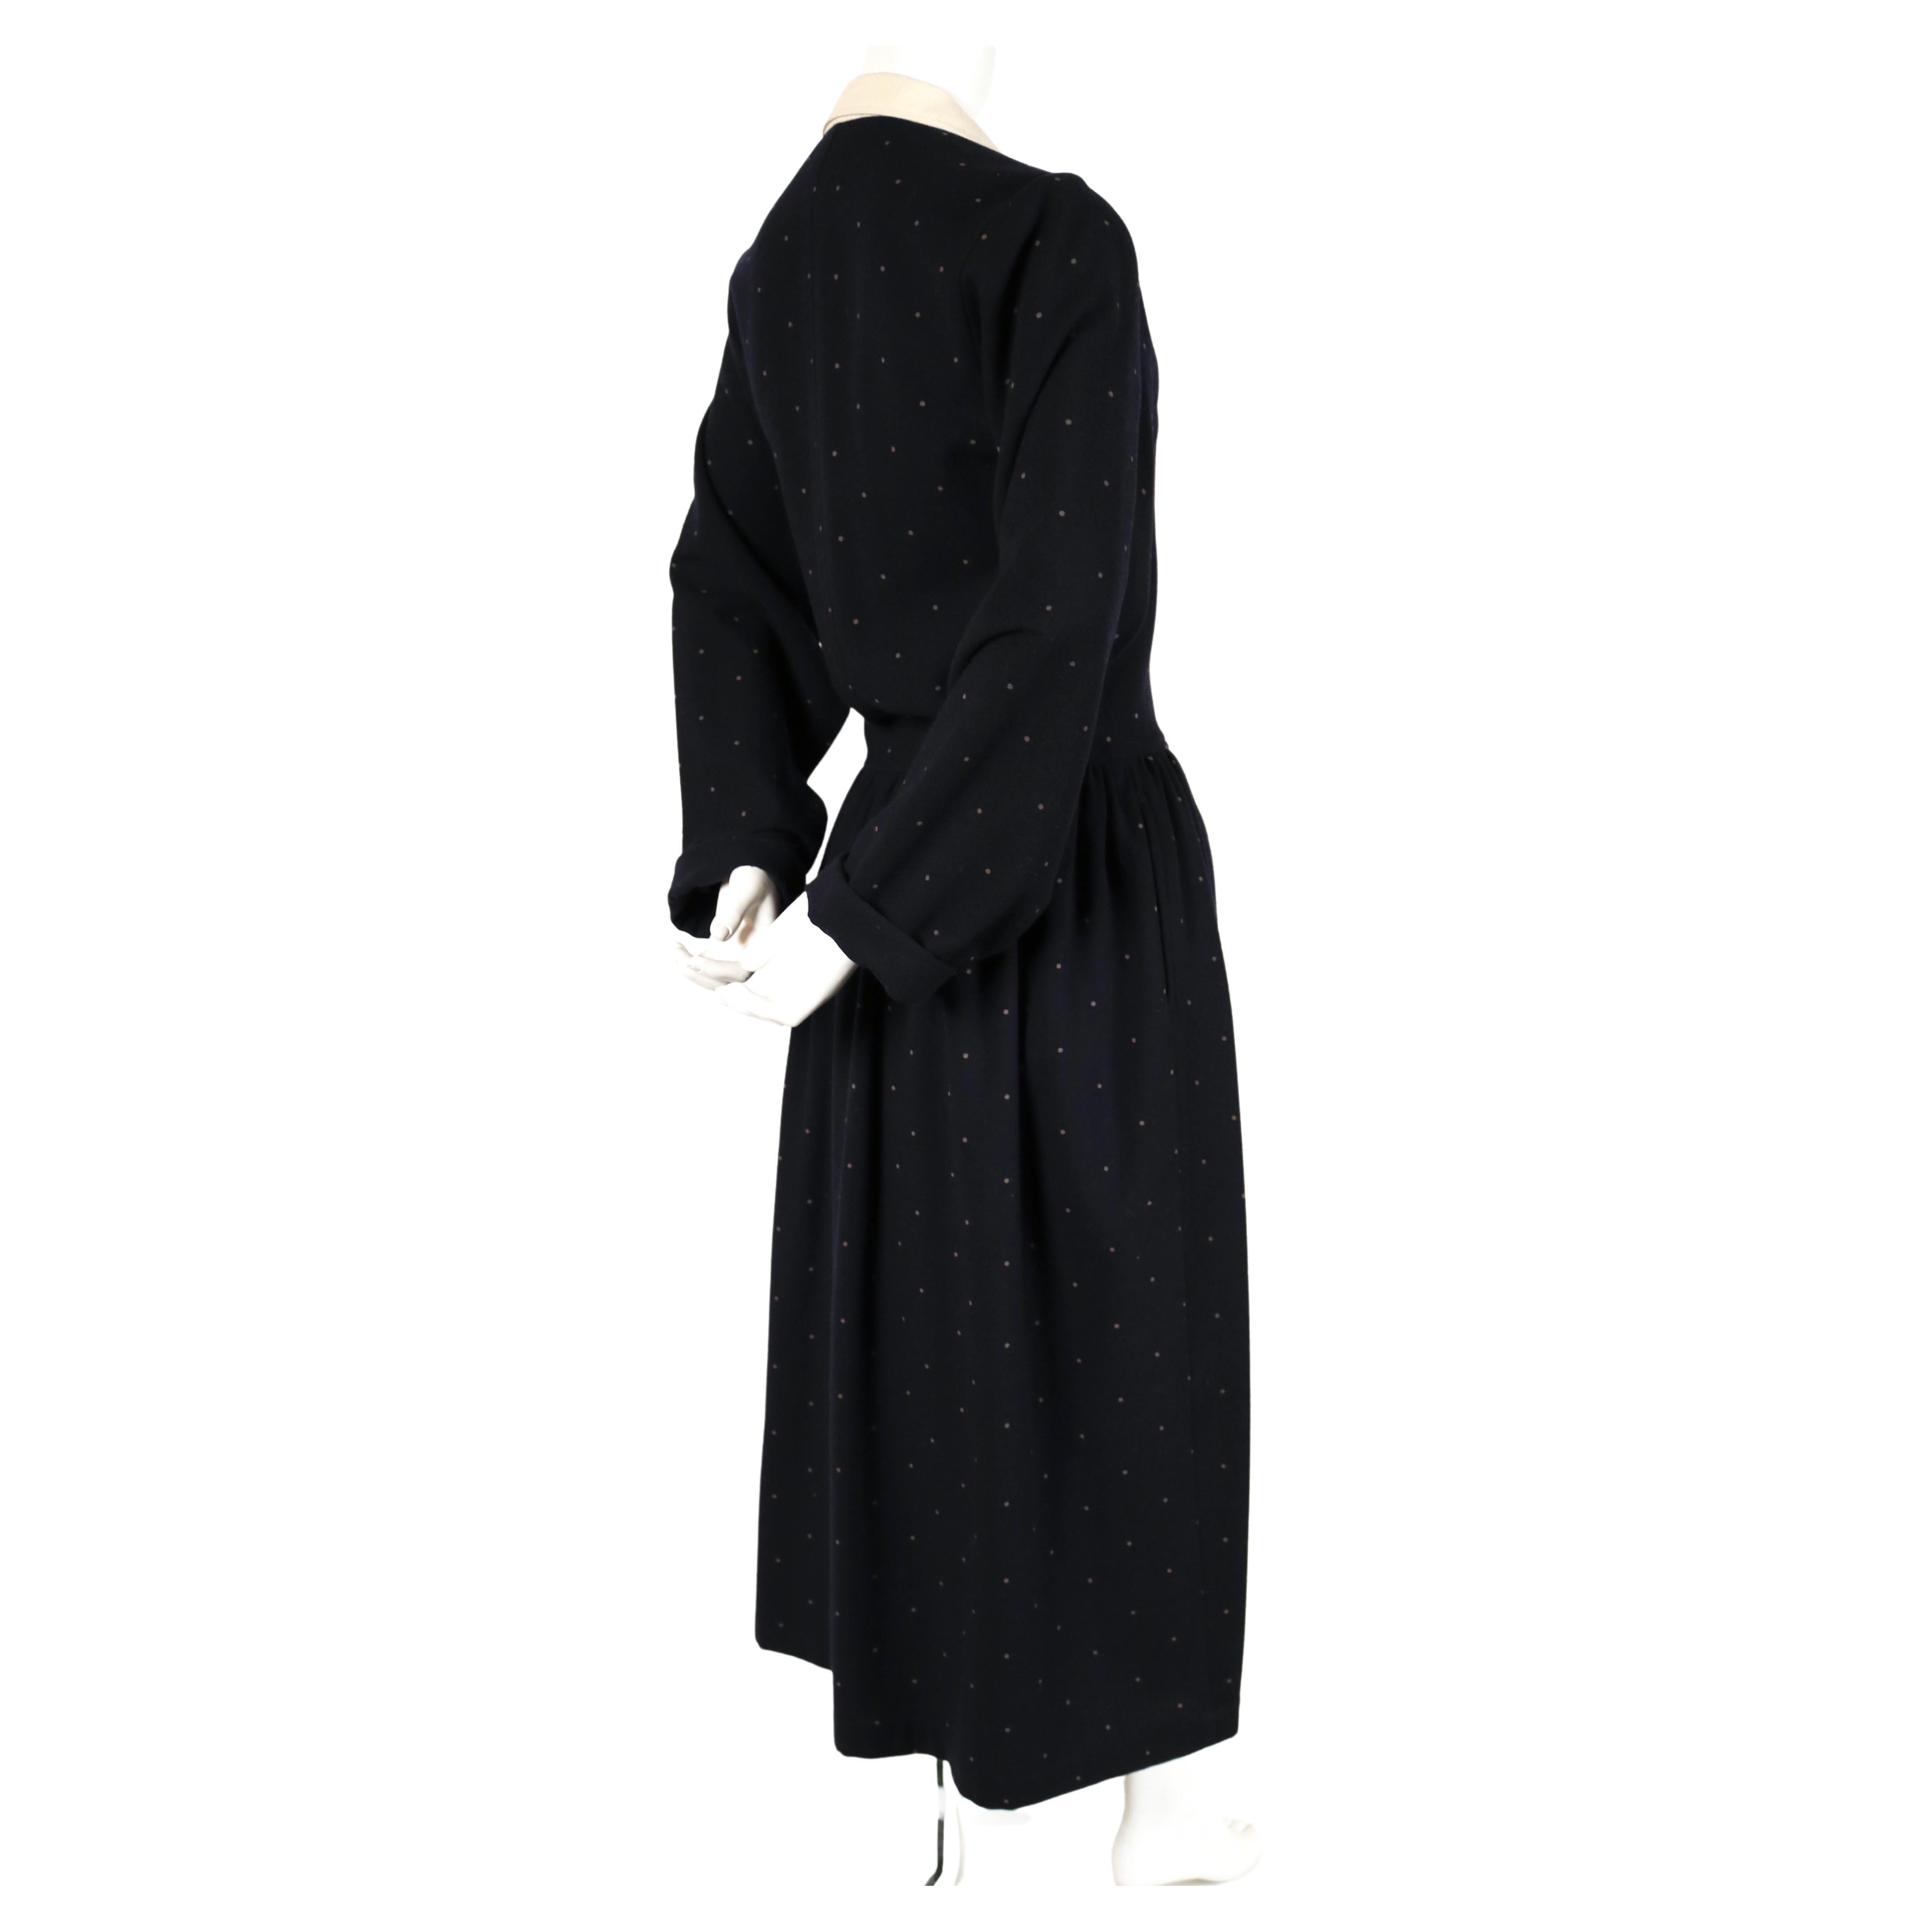 Very rare, navy-blue and off white polka dot woven wool dress with asymmetrical closure and draped front from Comme Des Garcons dating to 1985. Japanese size 'S'. Approximate measurements: shoulders 14.5